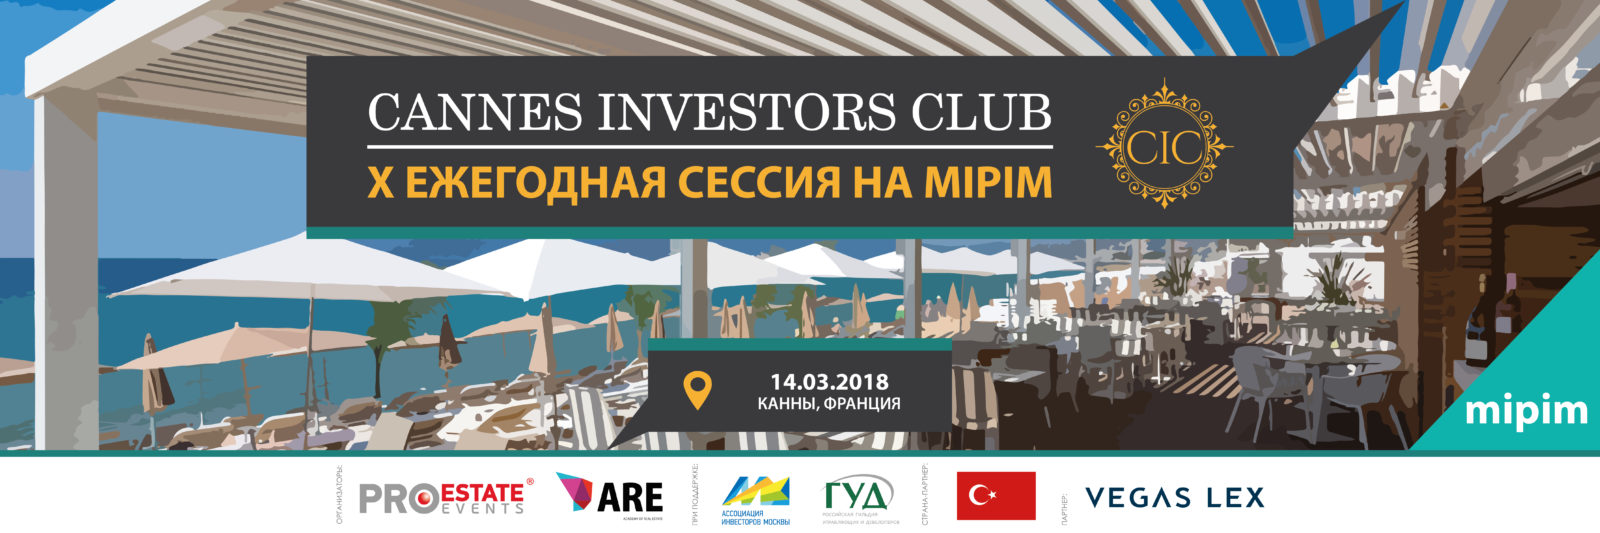 western investment club